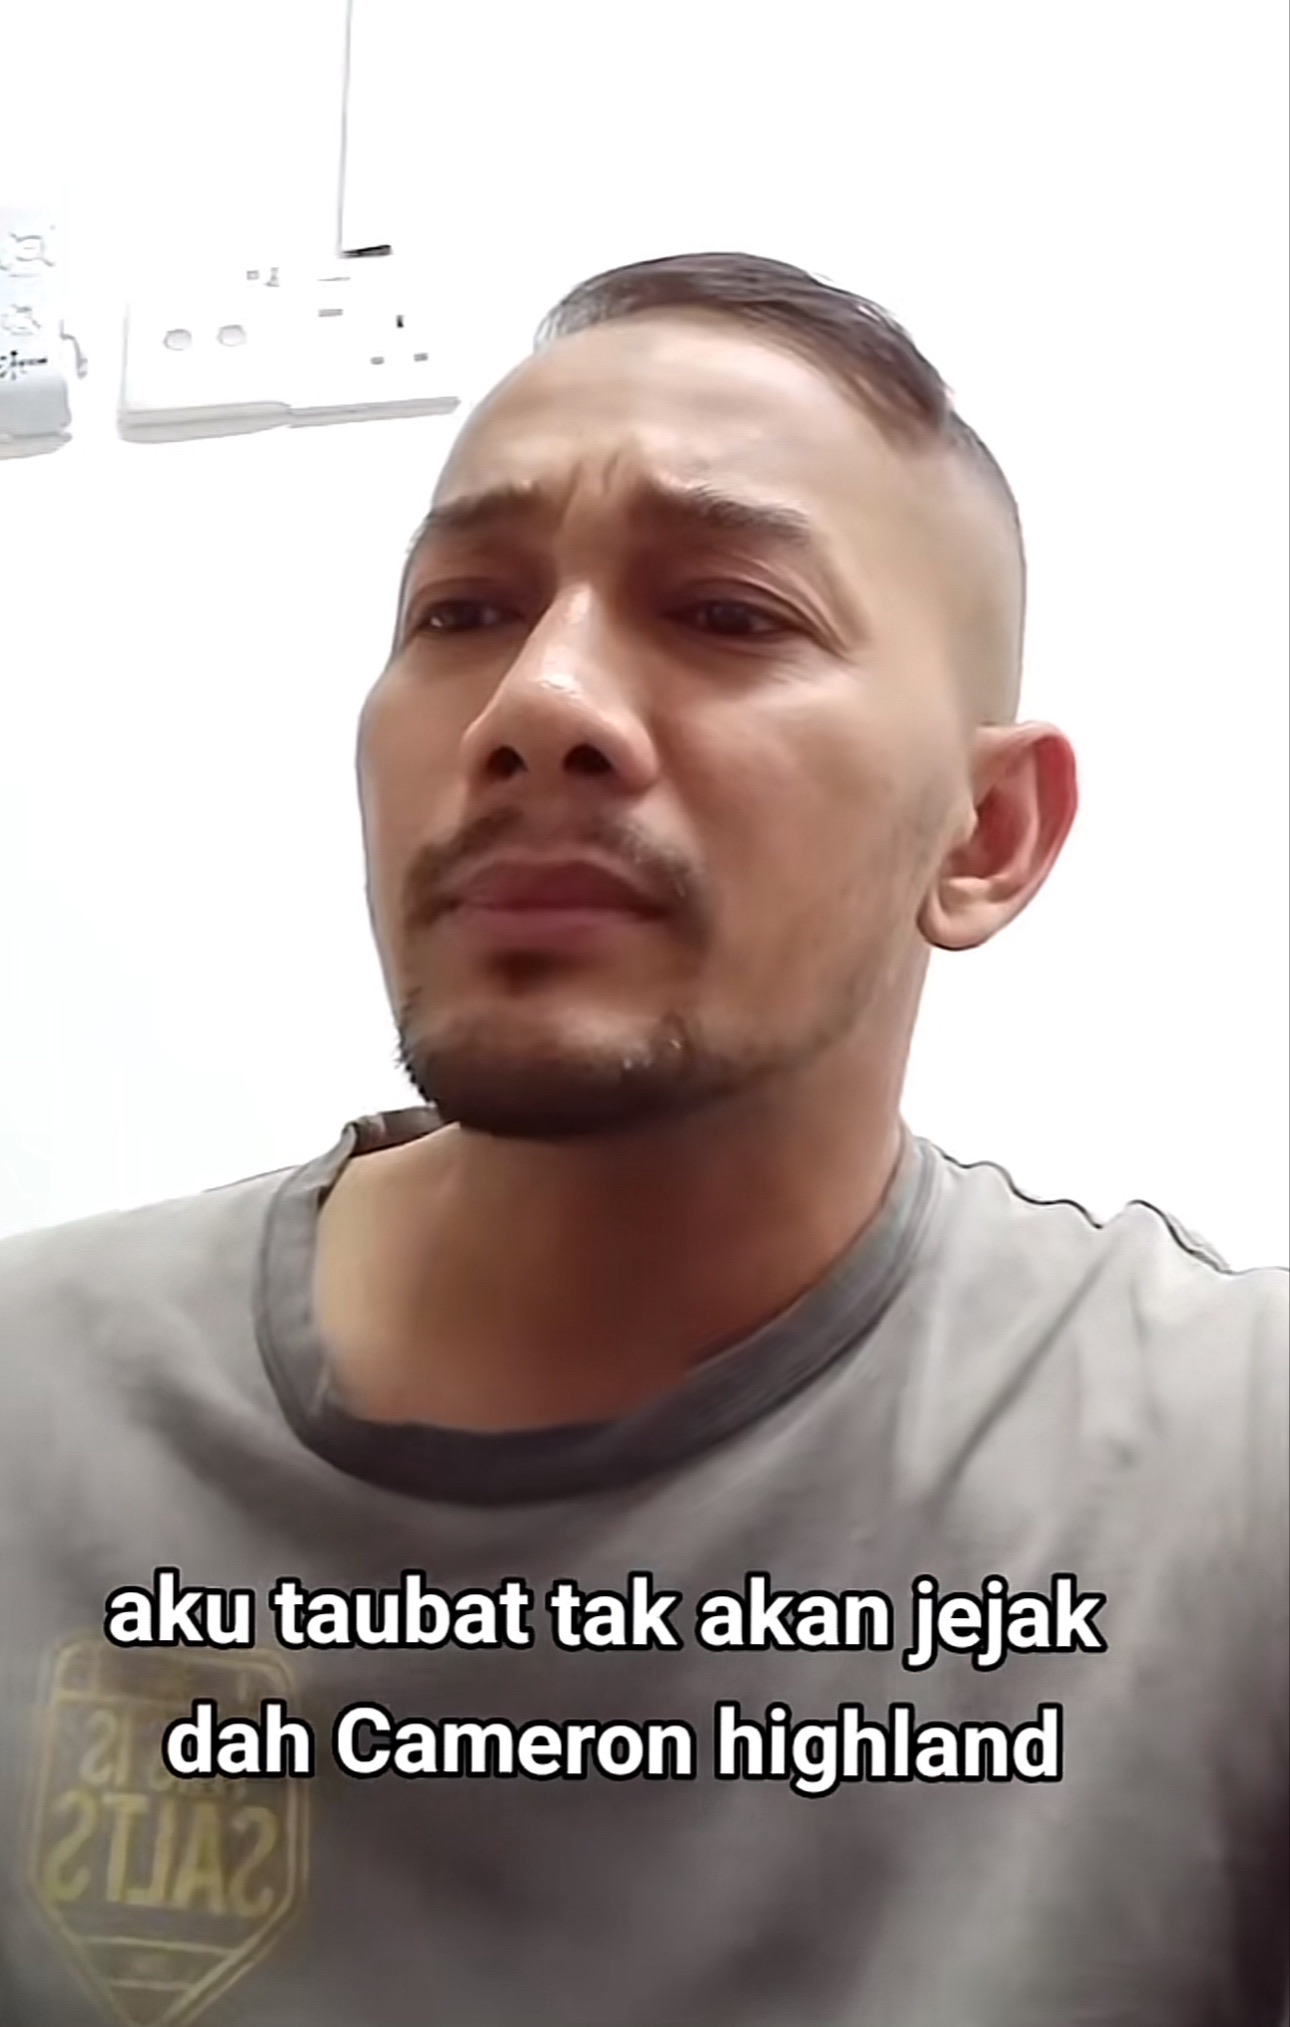 Msian man talks about cameron highland being expensive